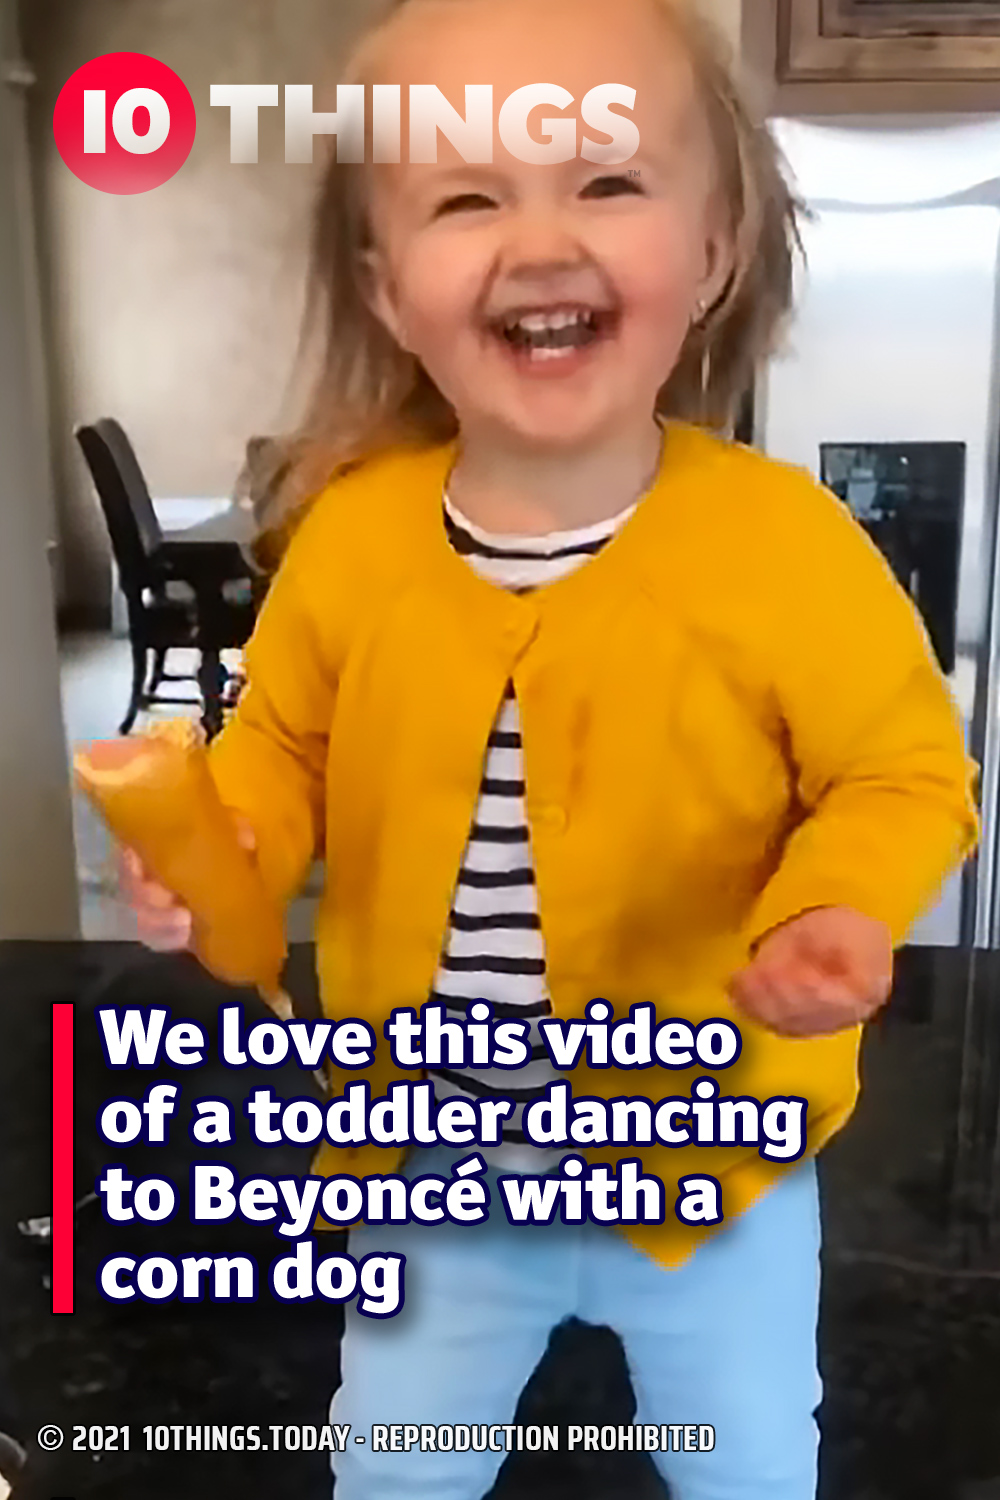 We love this video of a toddler dancing to Beyoncé with a corn dog